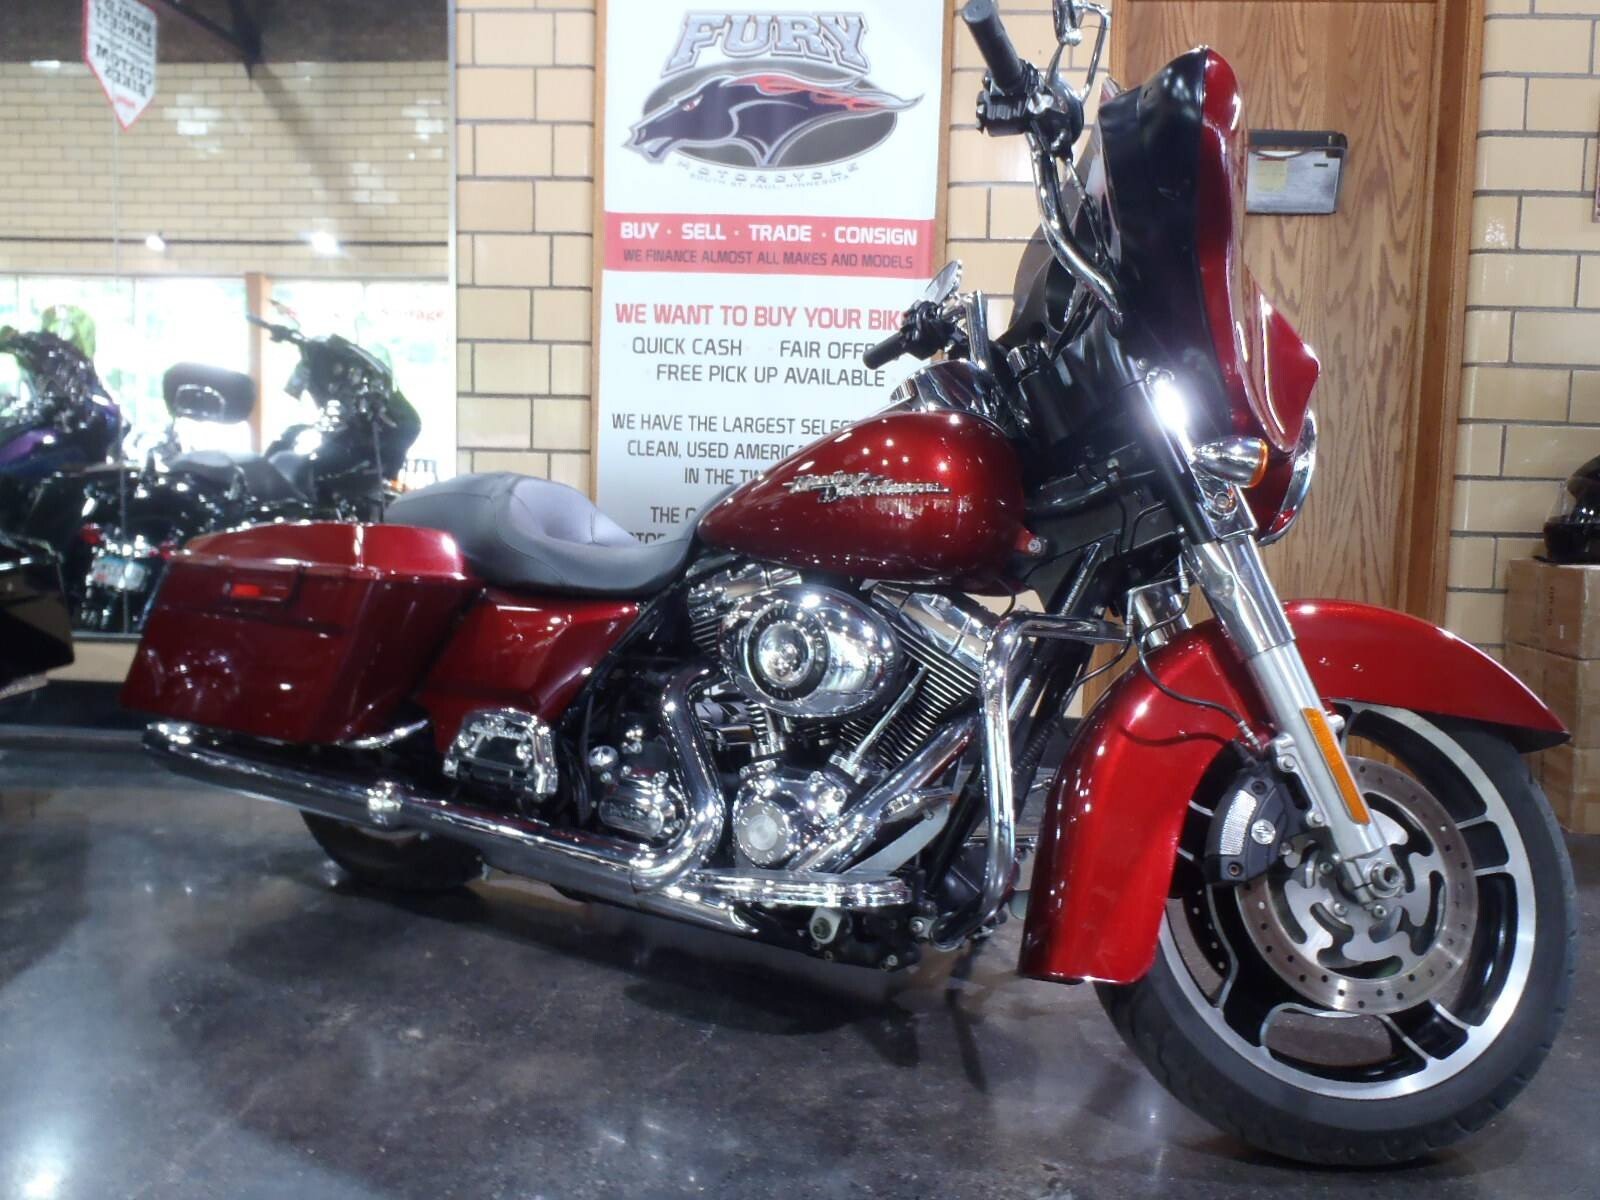 Motorcycles for Sale near Minneapolis, Minnesota - Motorcycles on